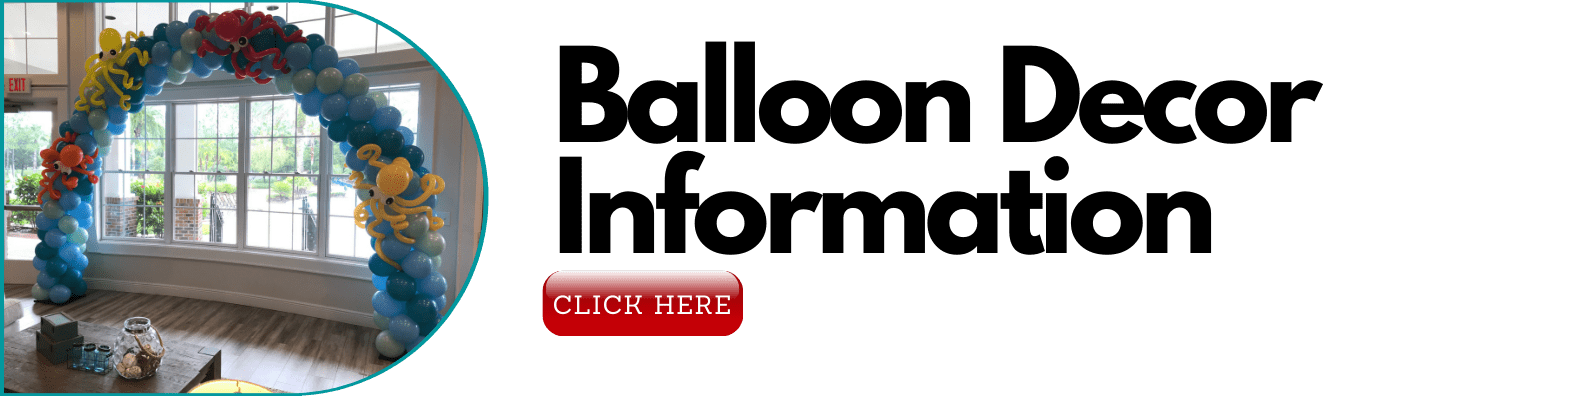 Balloon Decor Contact Information Page Button For Yte Events And Balloon Decor